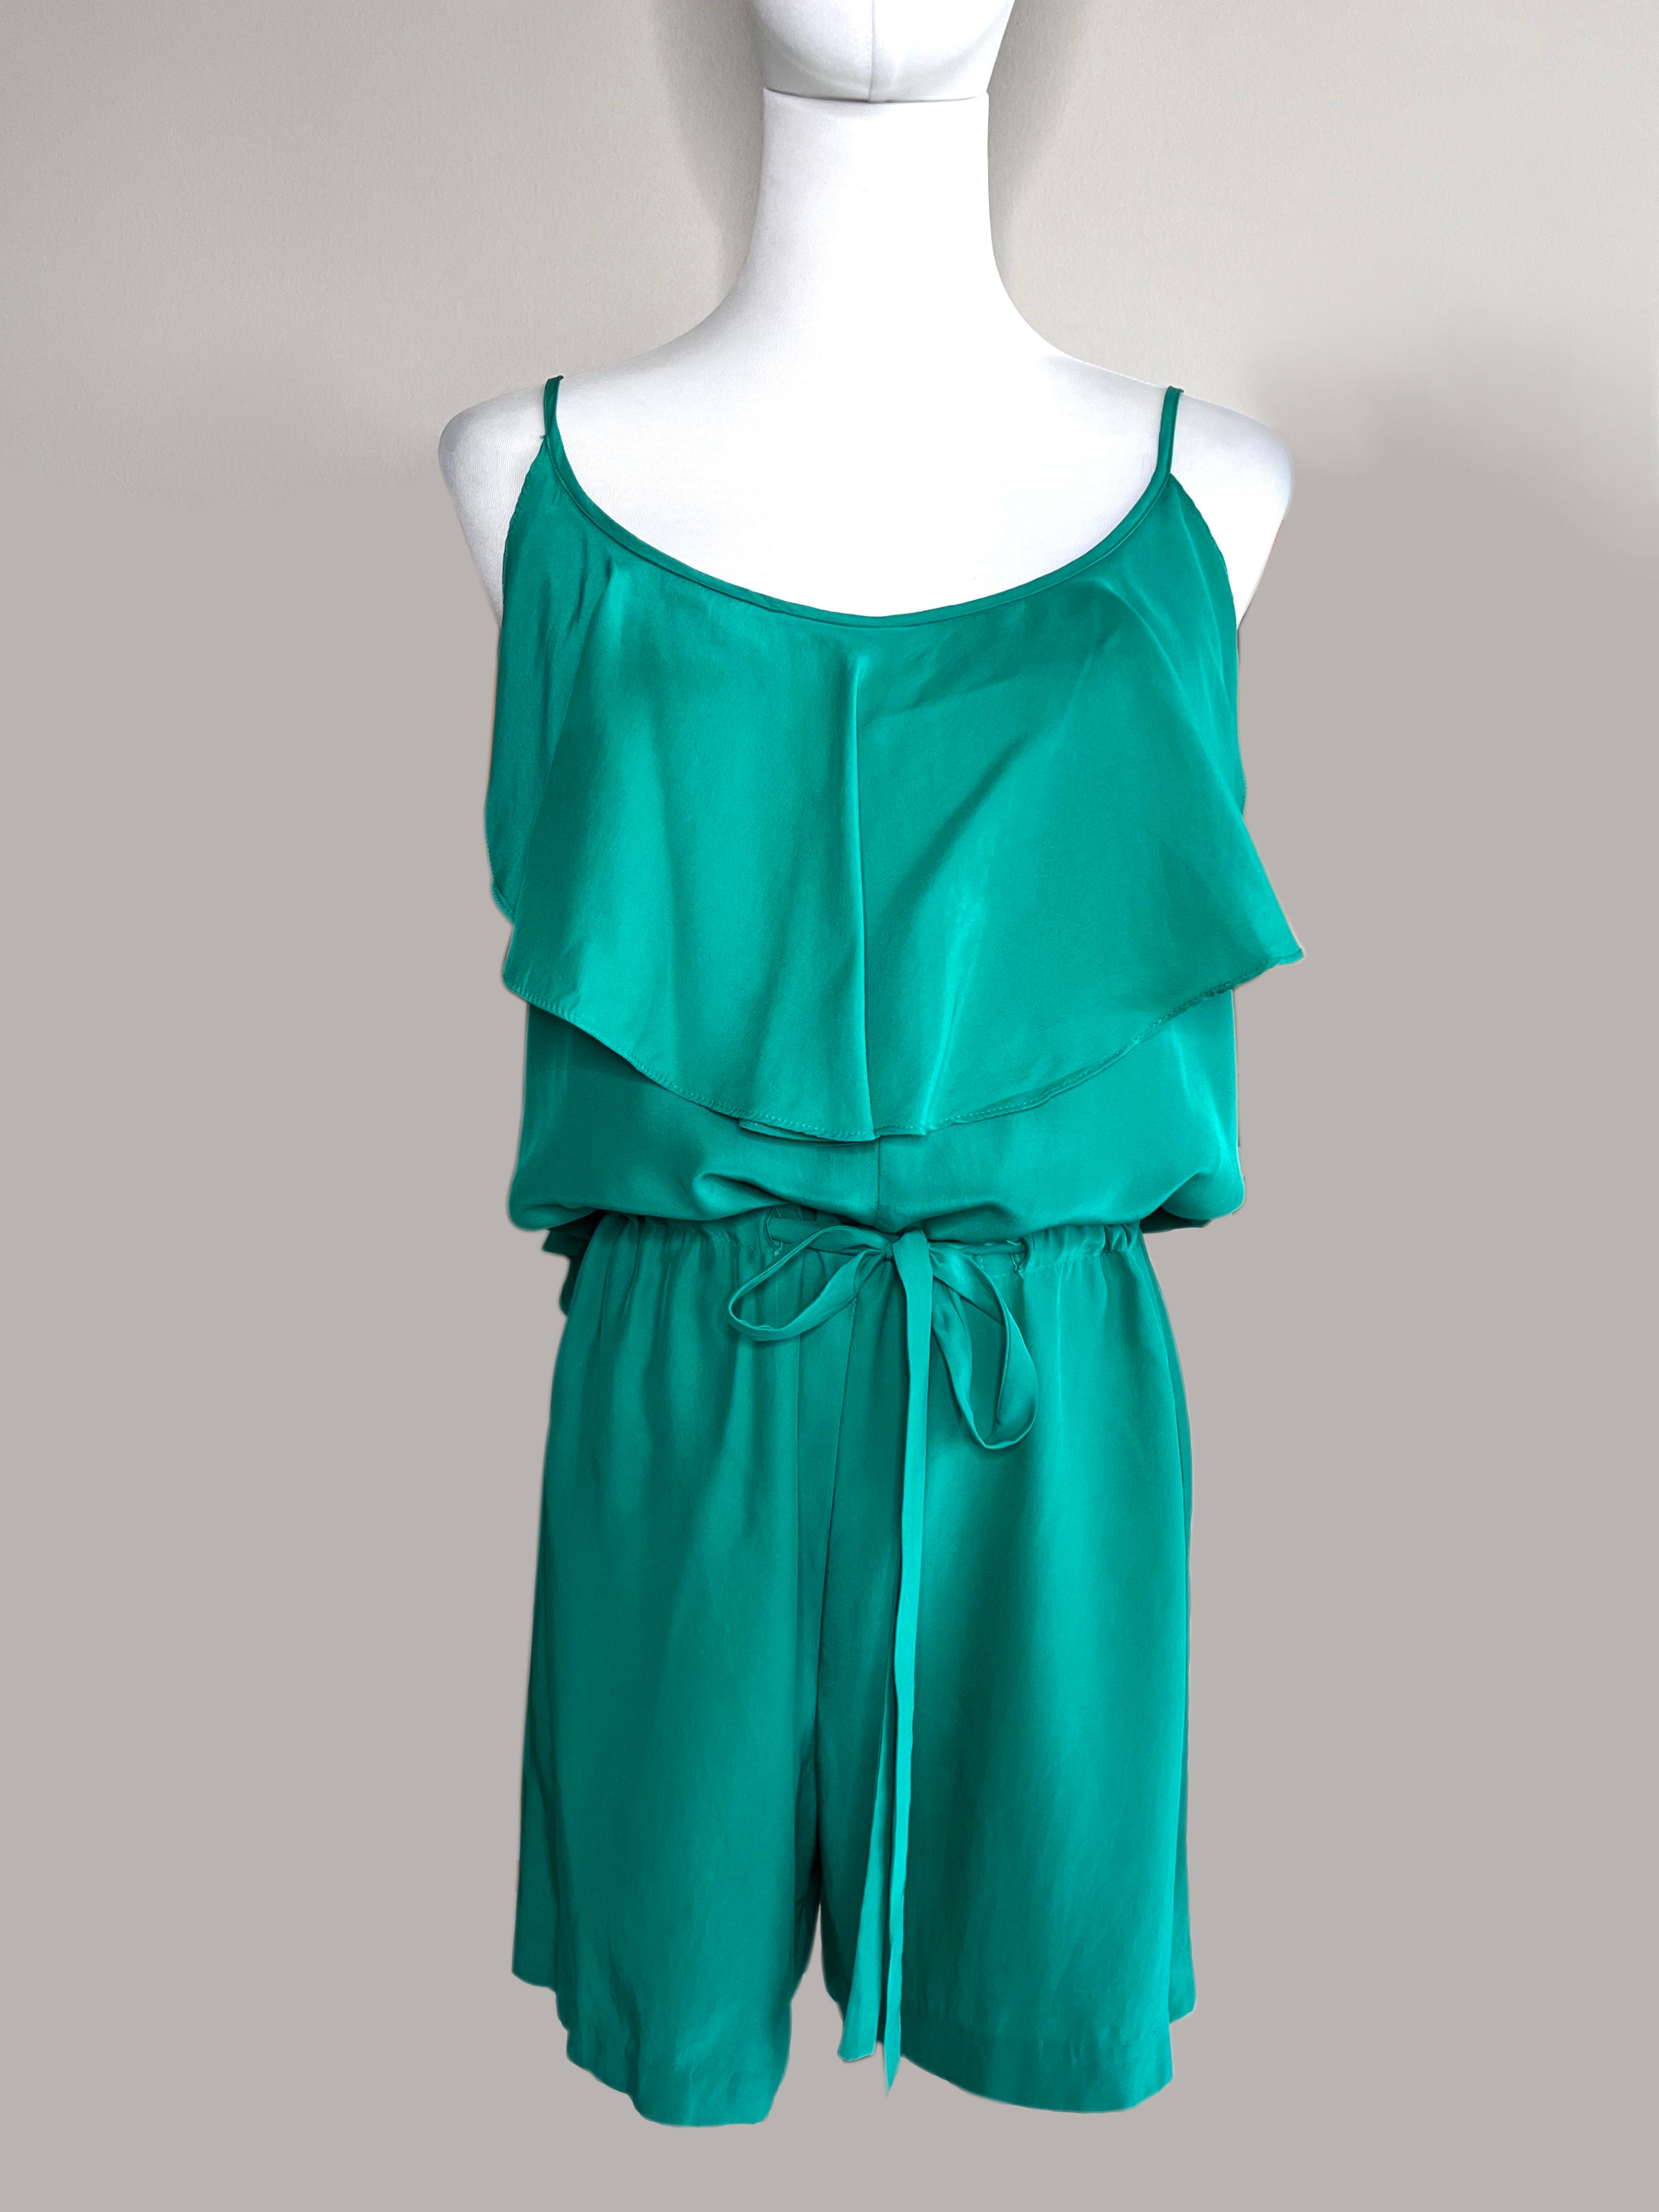 Green strappy layered playsuit short jumpsuits - AKA